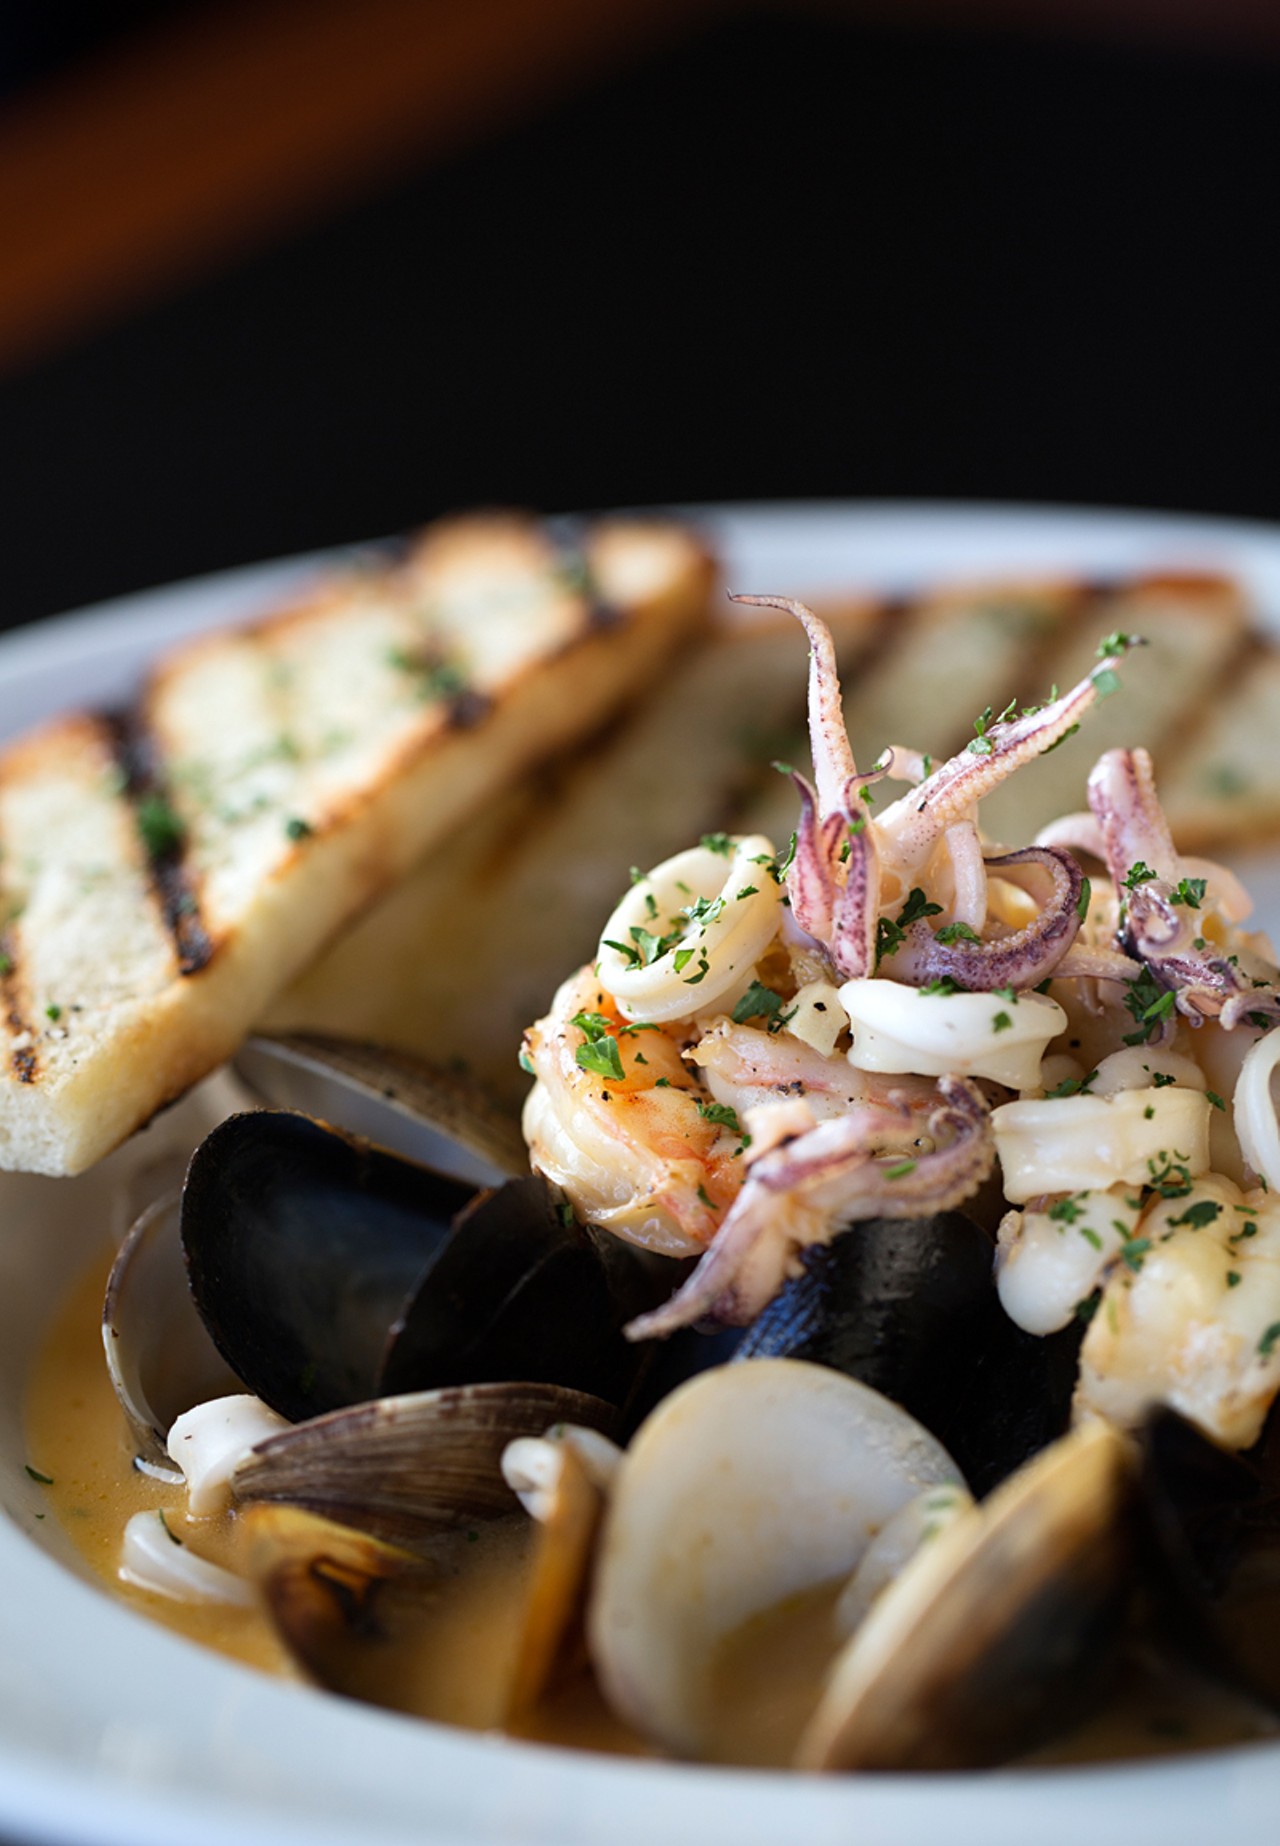 The seafood stew is made with mussels, clams, fish, shrimp and calamari in a tomato-saffron broth.